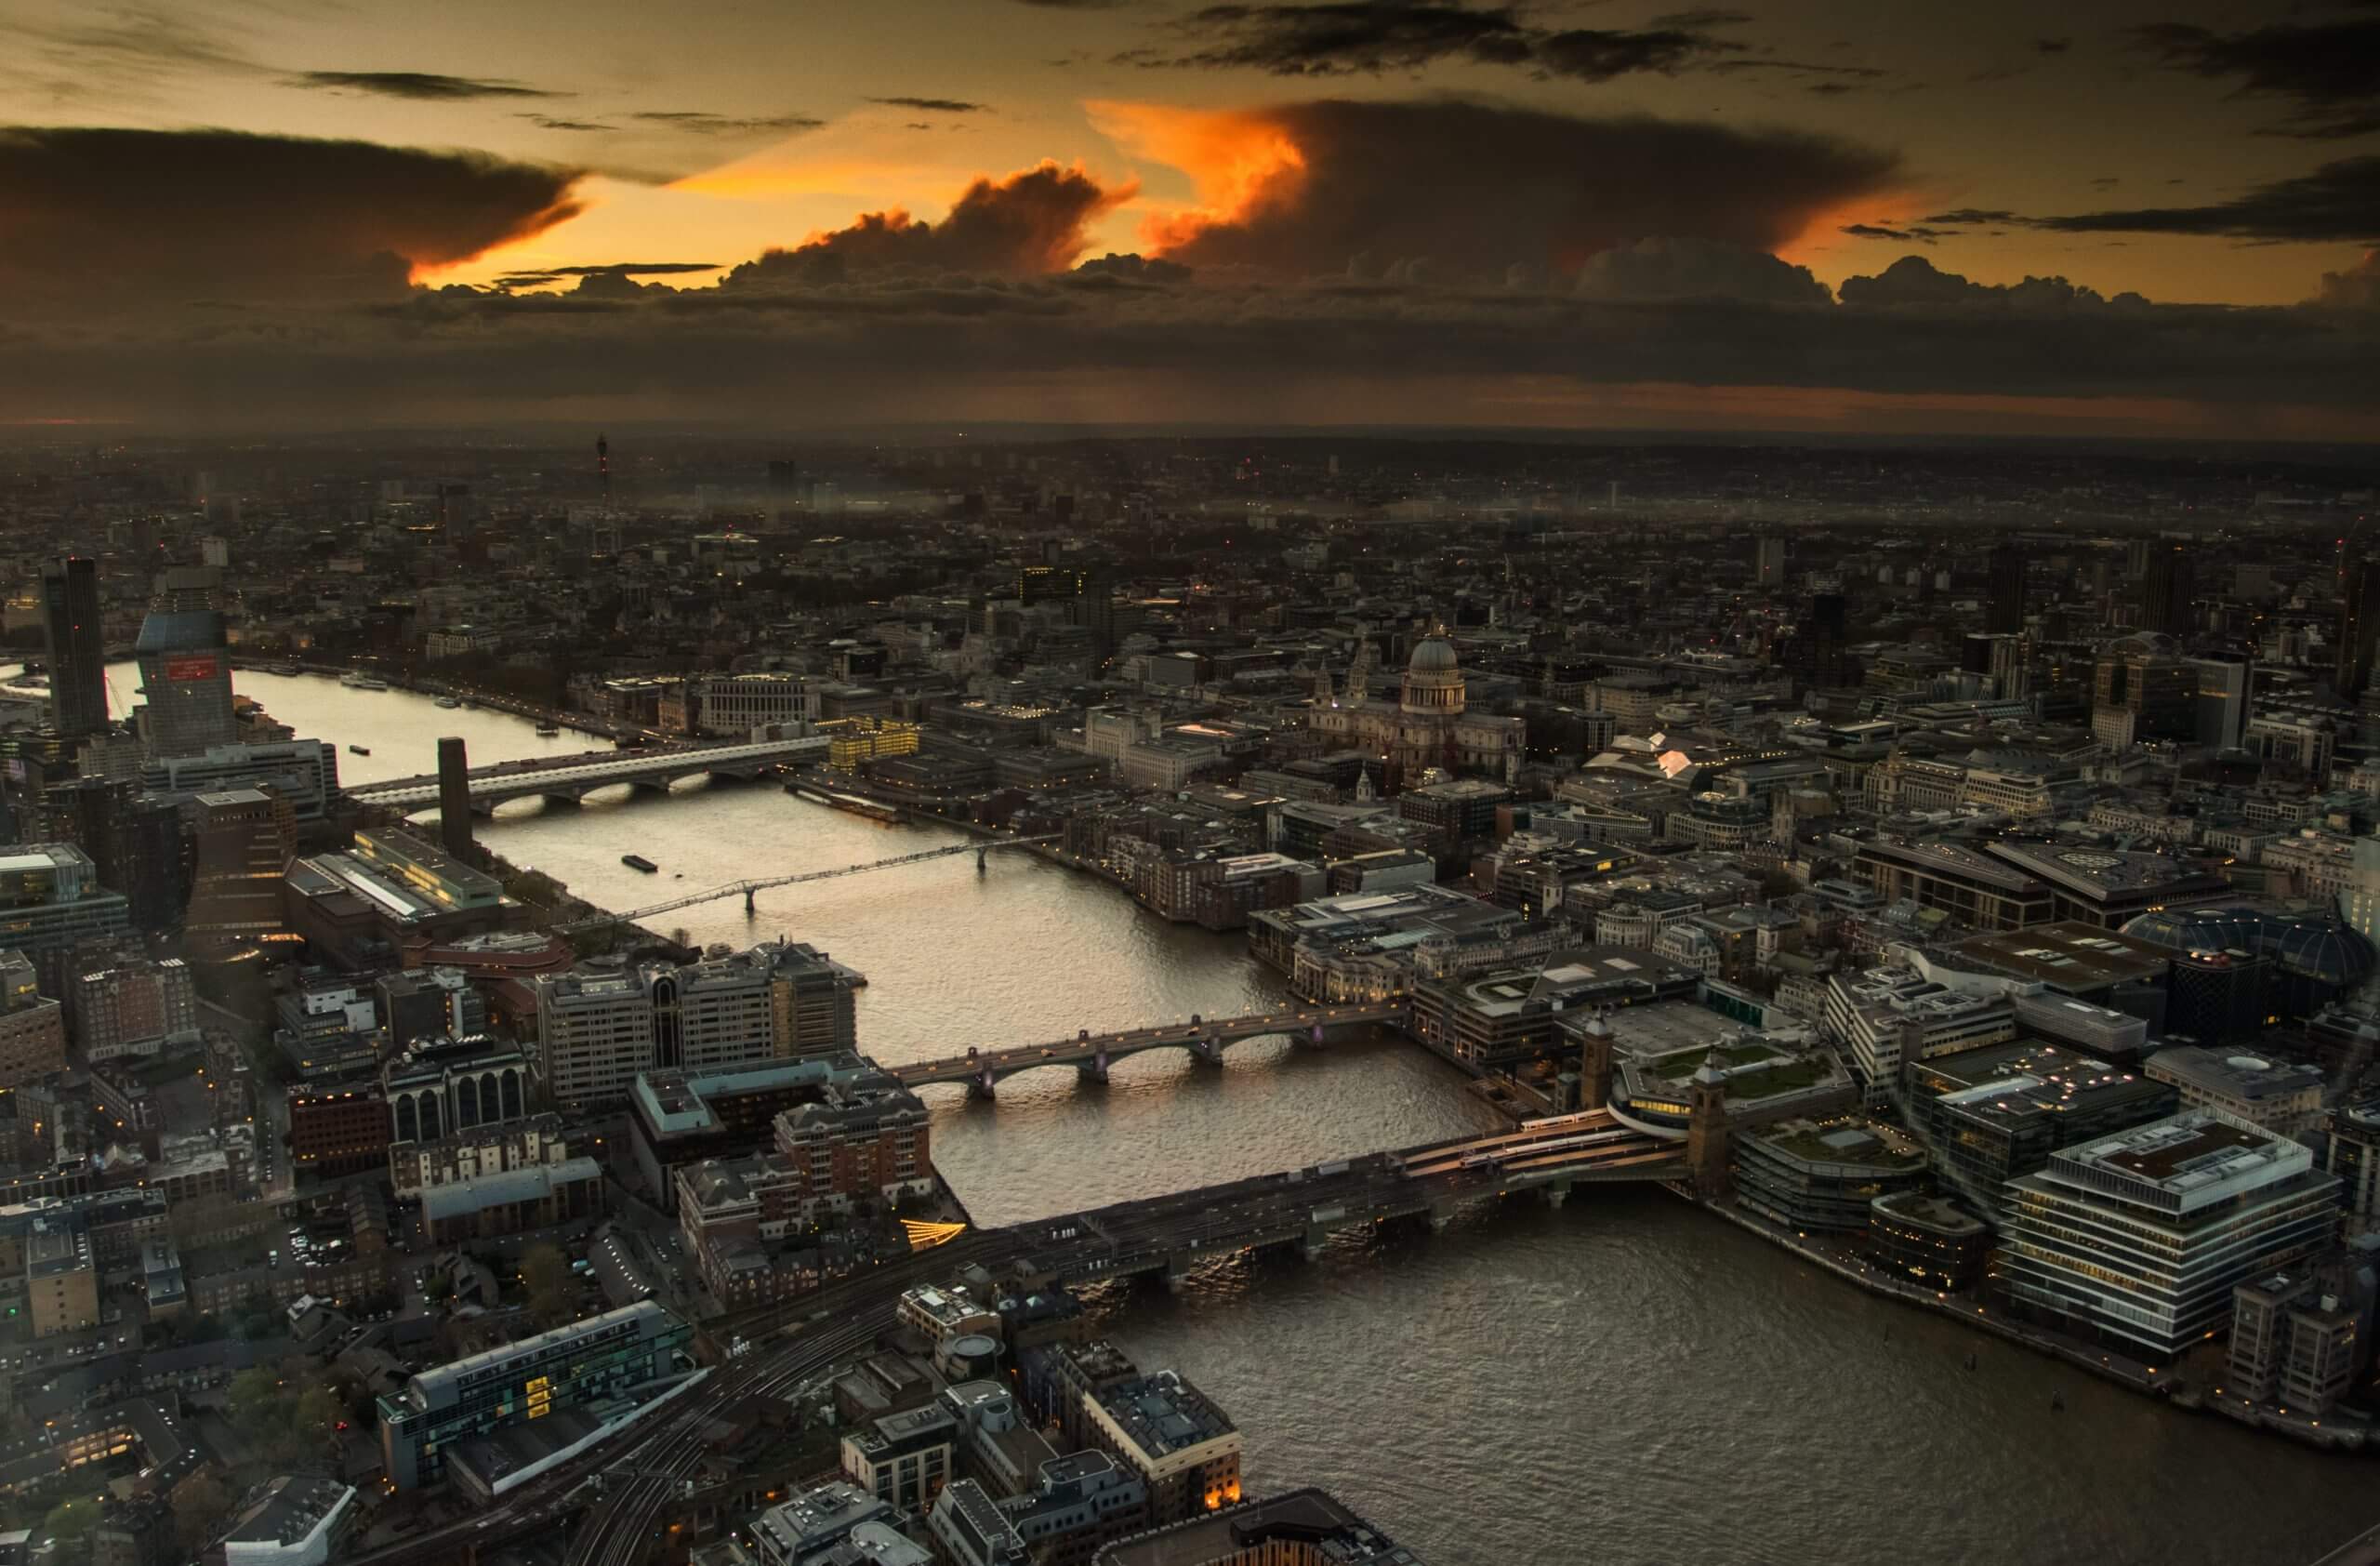 A sunset over a city in the United Kingdom